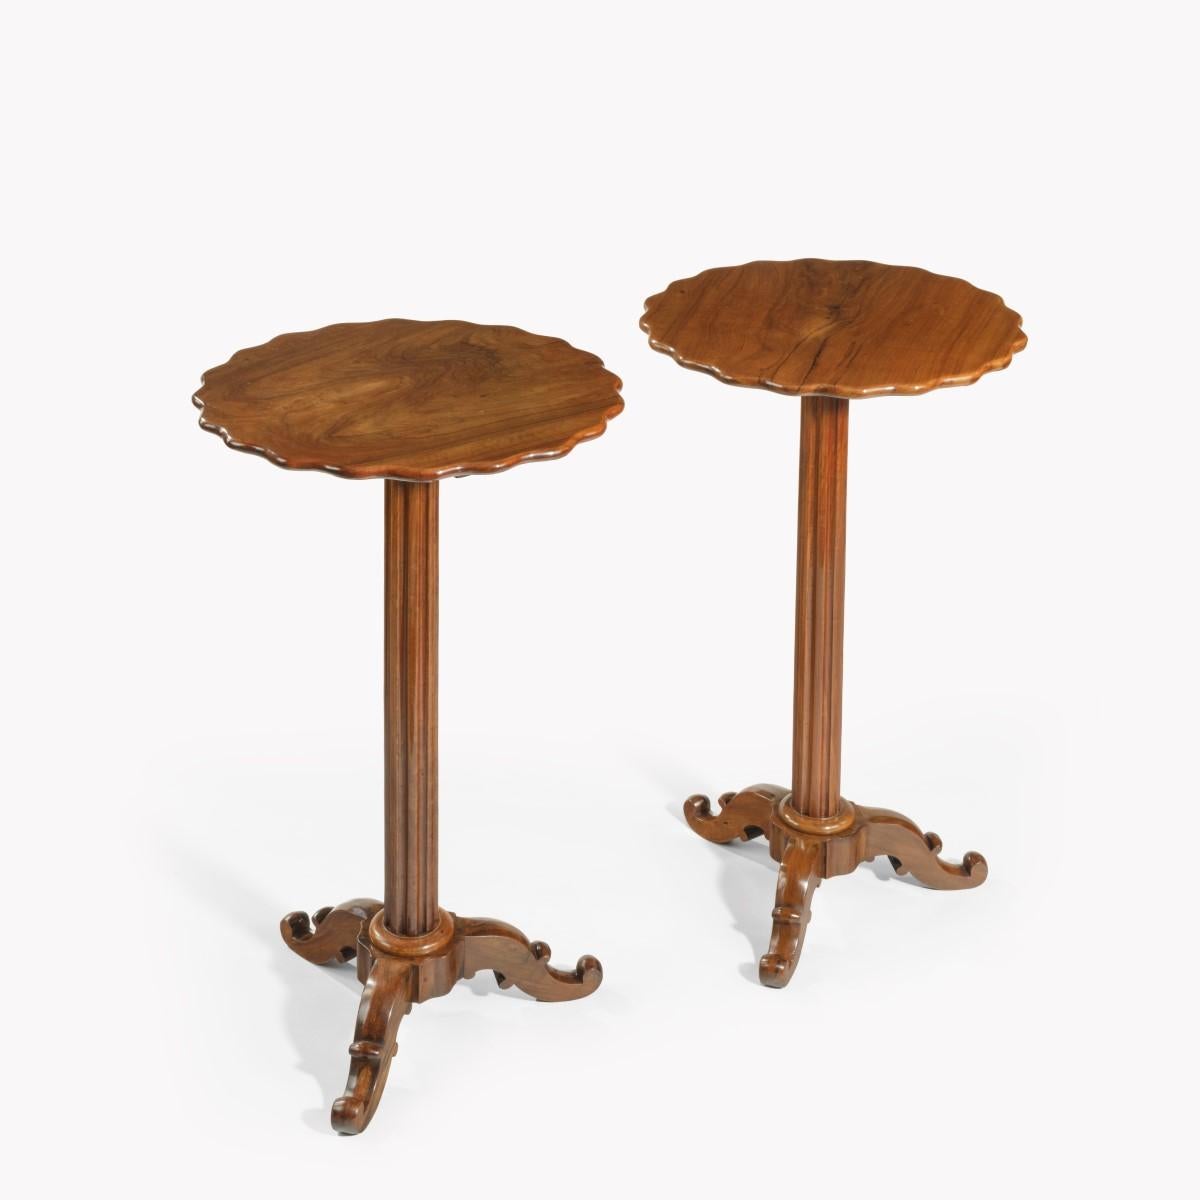 A pair of Italian solid olive wood side tables, each with a shaped circular top raised on a fluted support and scrolling tripod feet, (possibly Sorrento.) Italian, circa 1870.

Measures: Height 29 ½ inches   Width 16 ½ inches.